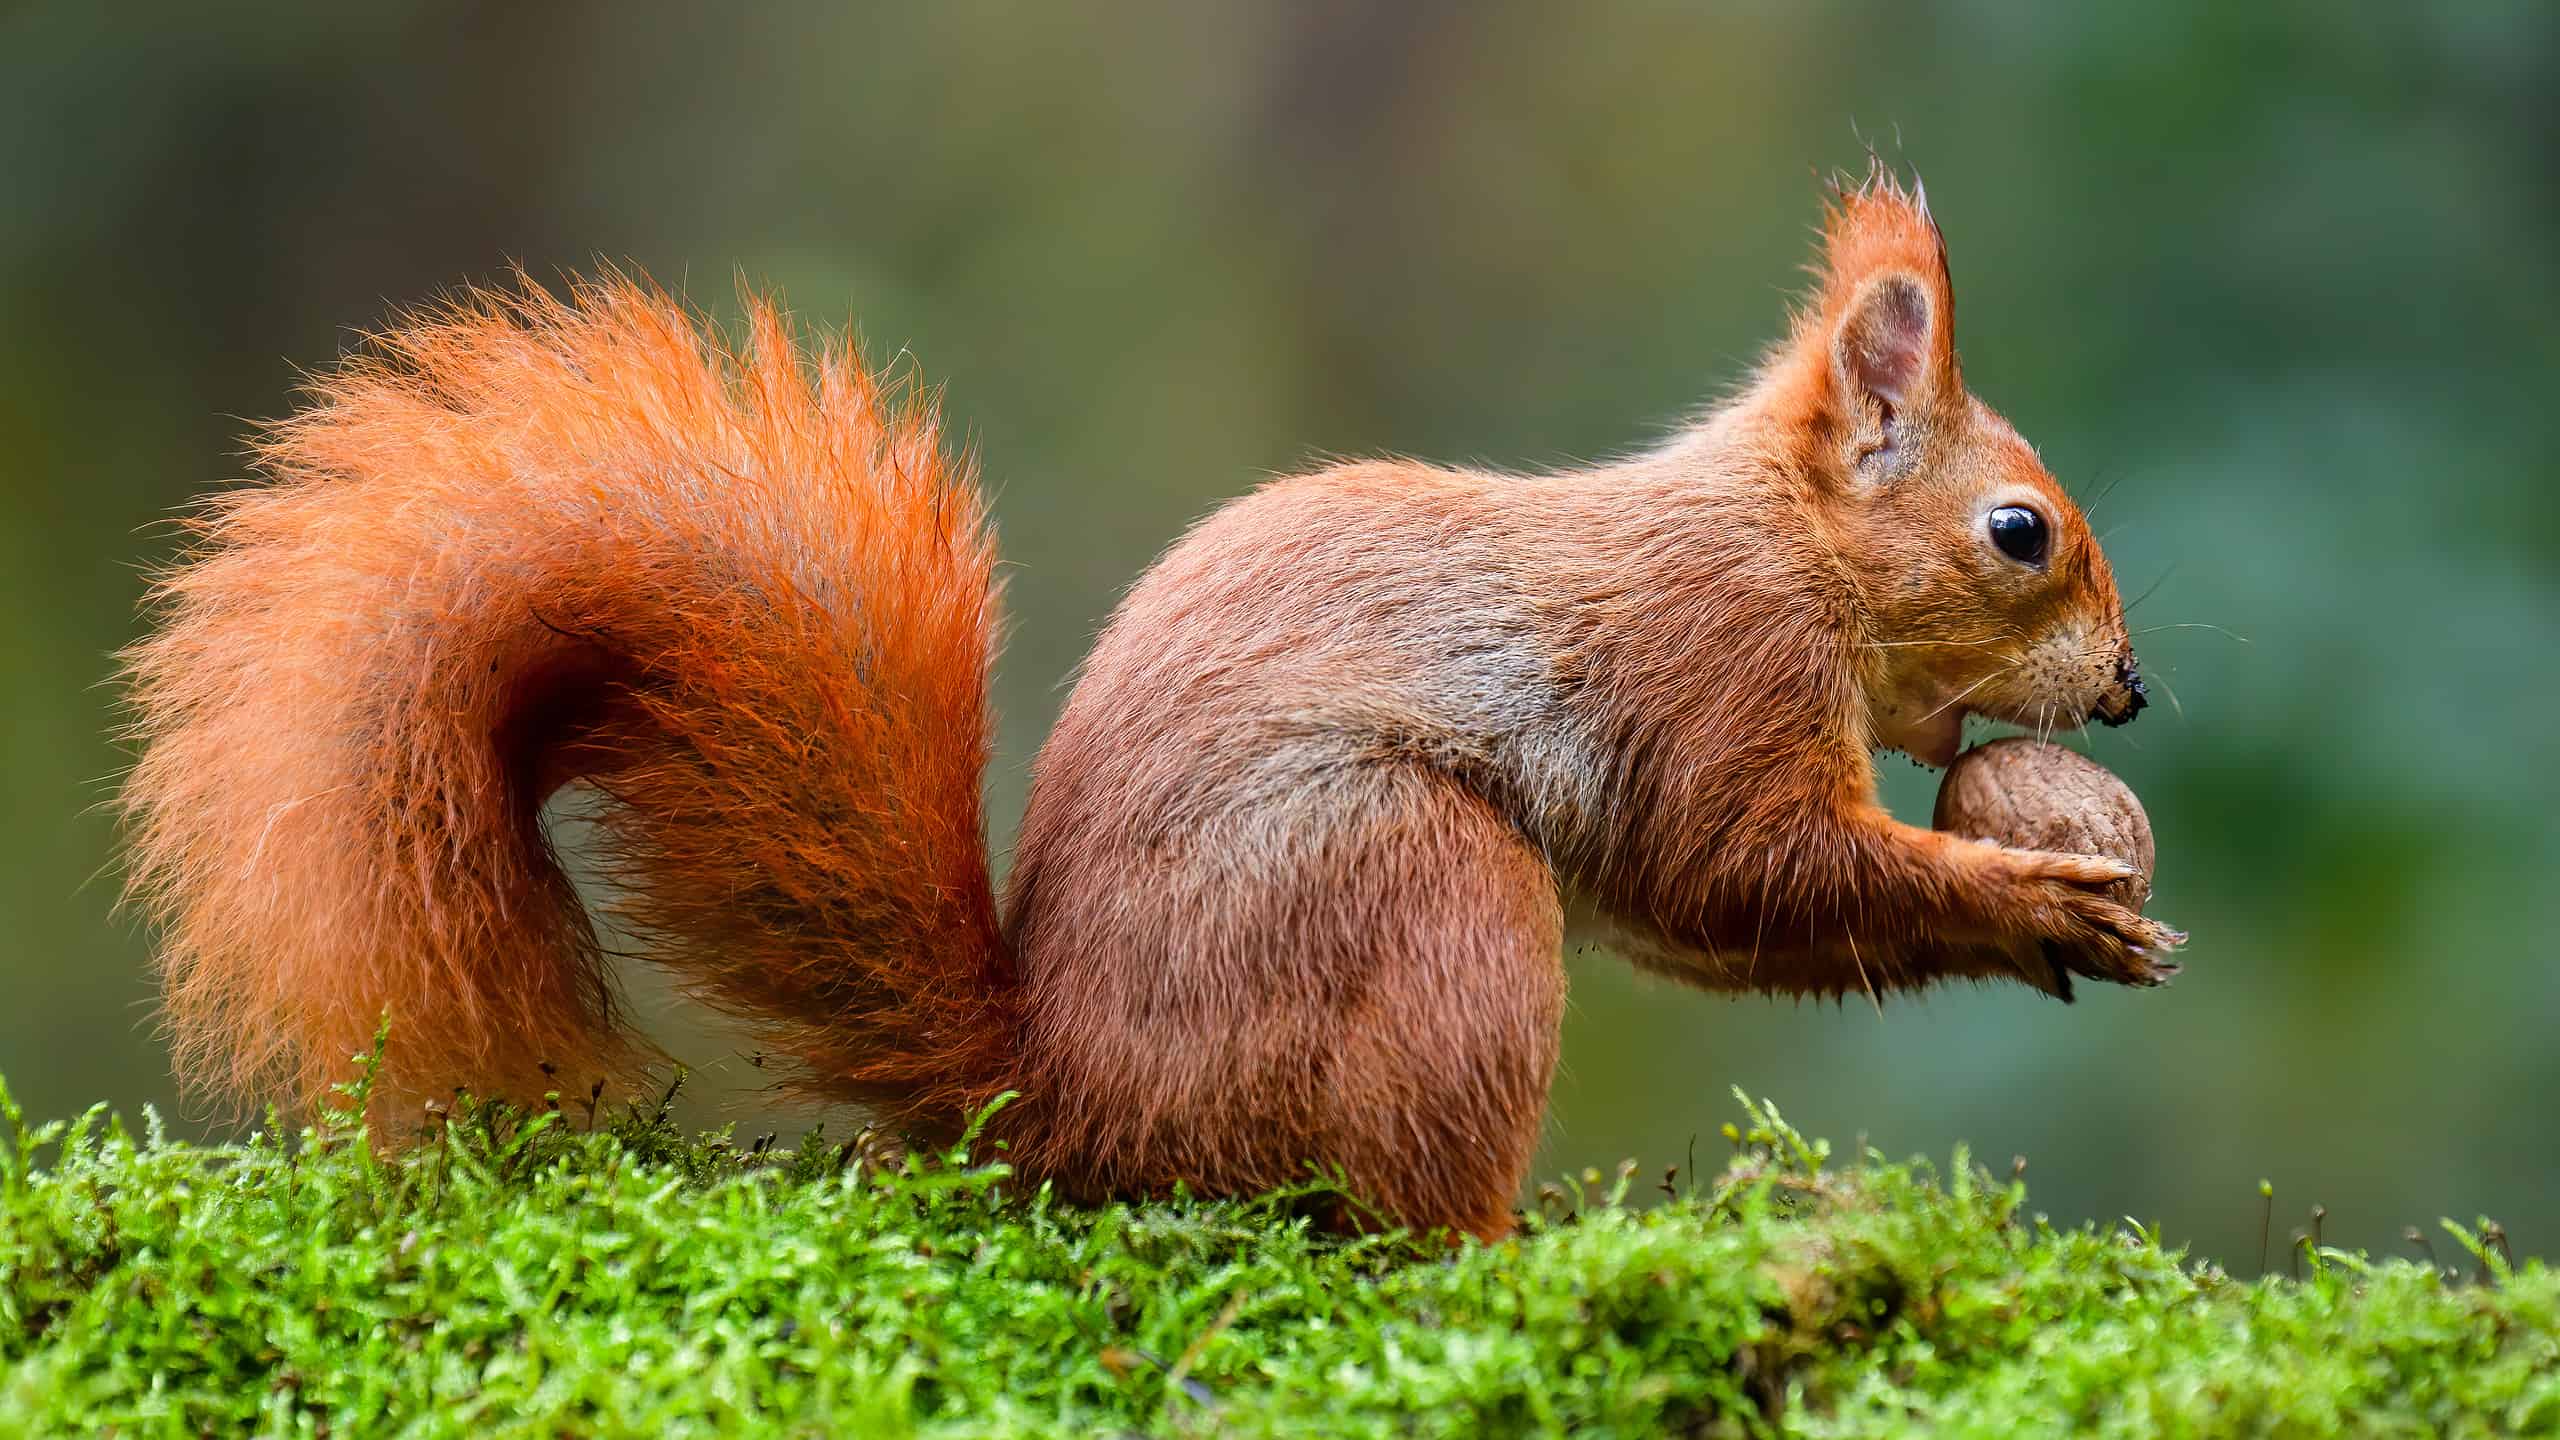 A red squirrel eating a nut on a moss trunk